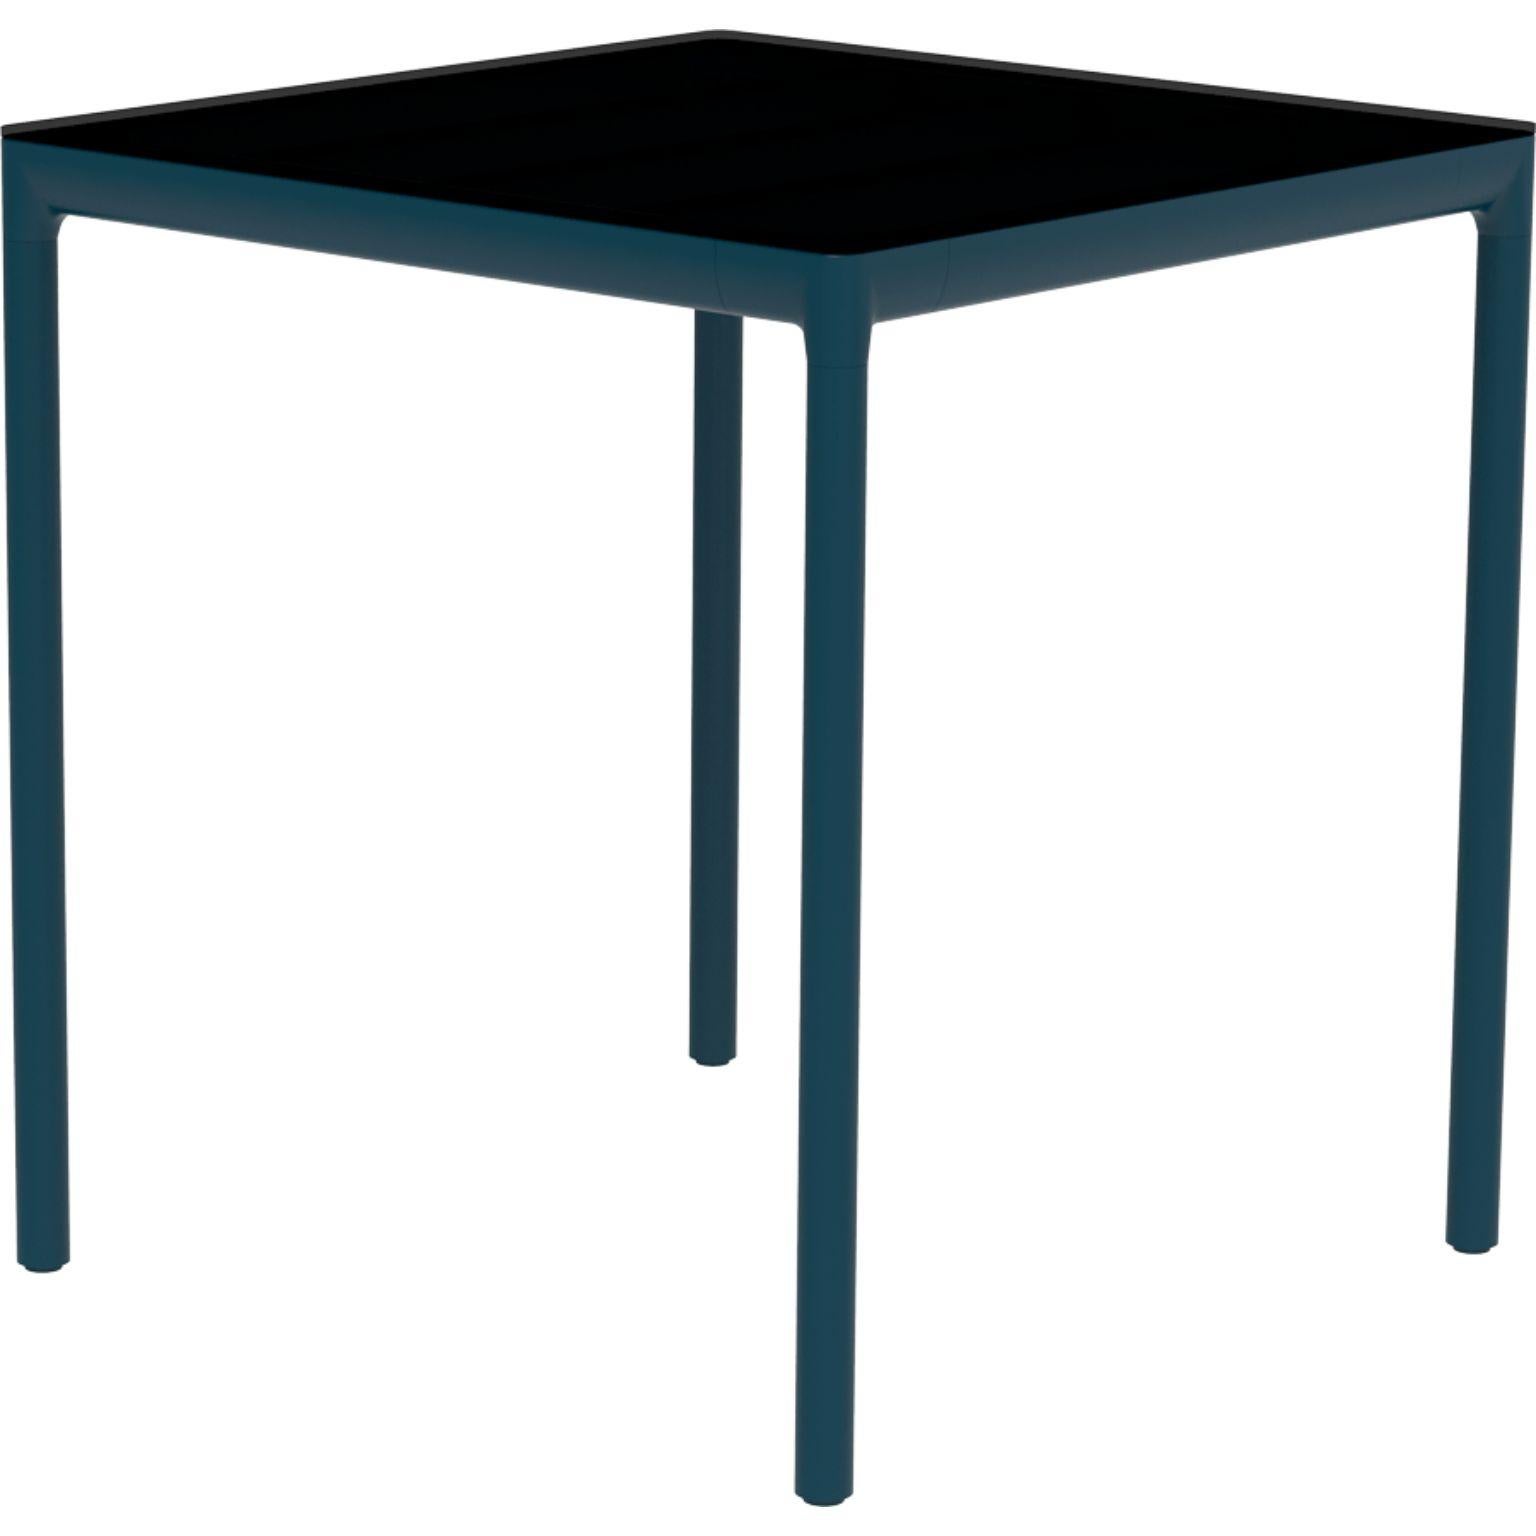 Ribbons navy 70 side table by MOWEE
Dimensions: D70 x W70 x H75 cm.
Material: Aluminum, HPL top.
Weight: 12 kg.
Also available in different colors and finishes. (HPL Black Edge or Neolith top).

An unmistakable collection for its beauty and